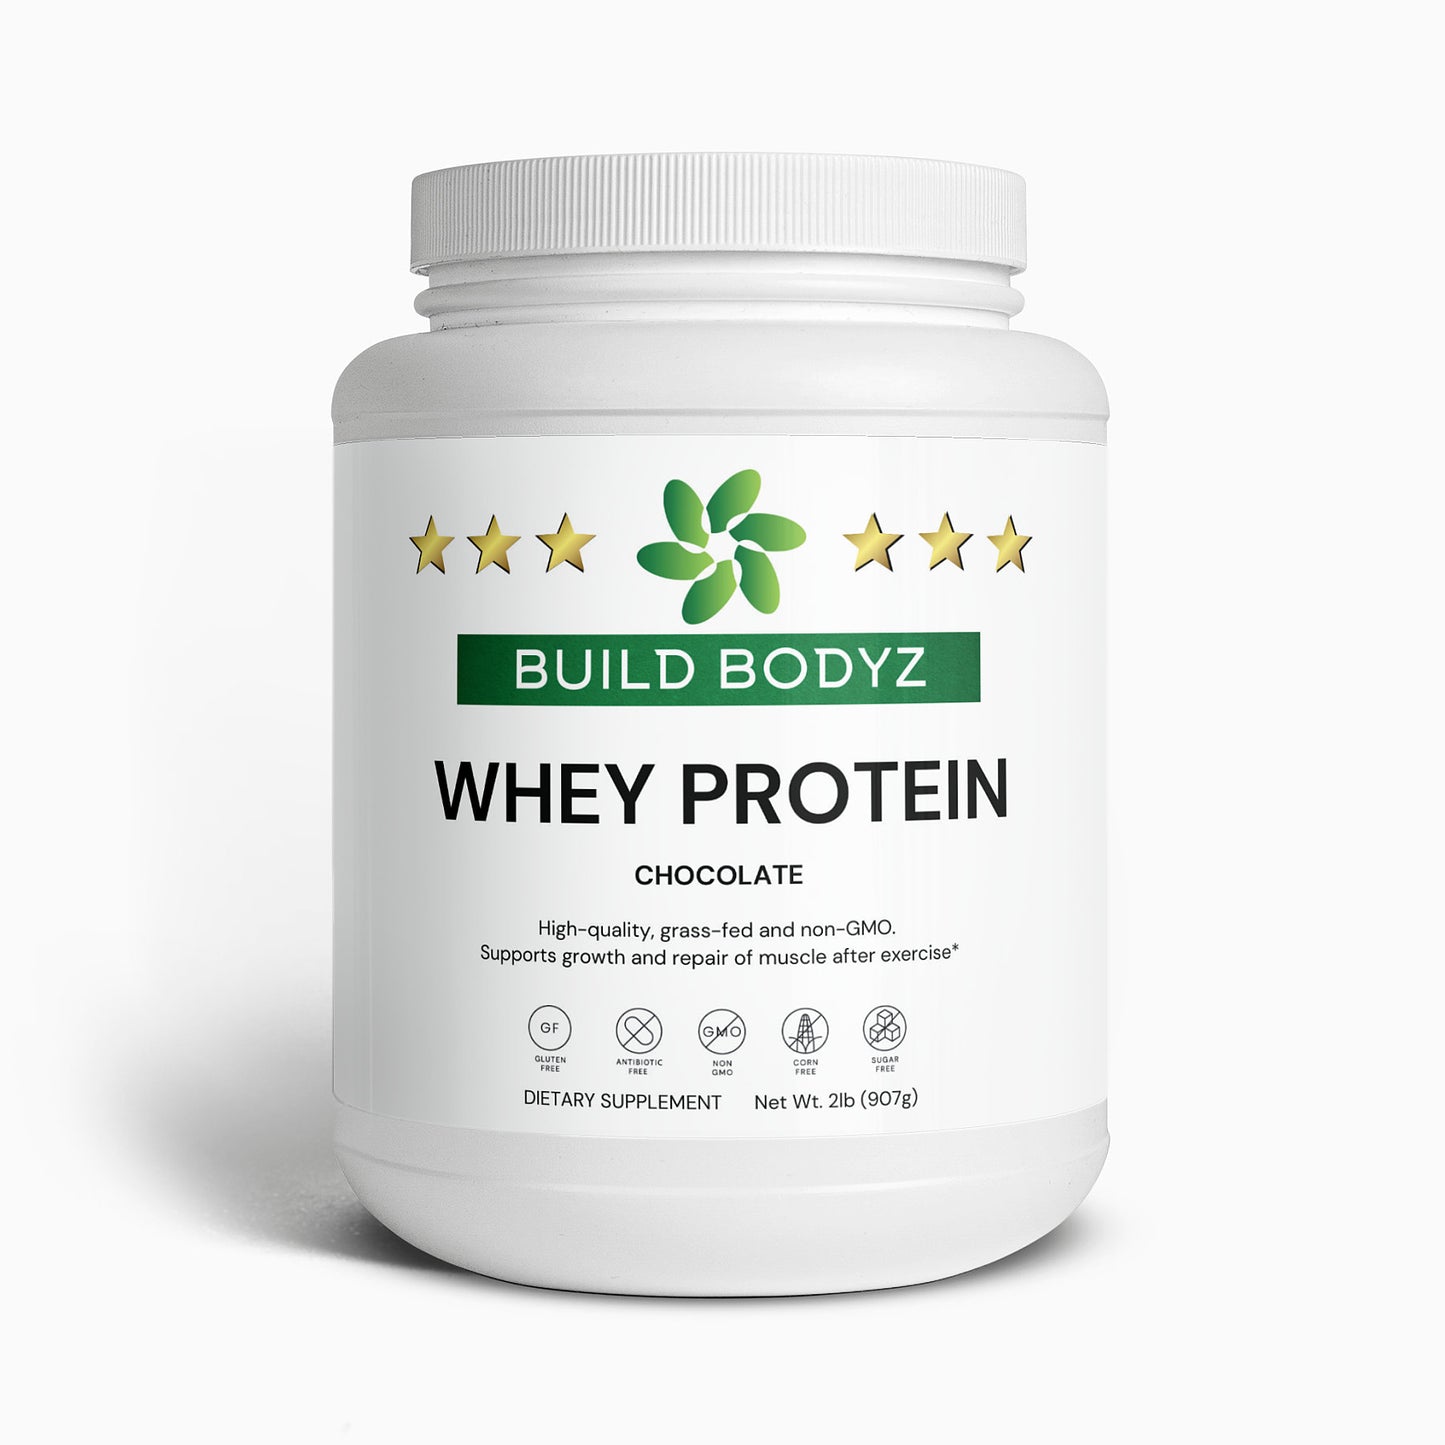 Chocolate Whey Protein Concentrate - Fast Muscle Growth and Recovery - 2lb (907g) - Gluten-Free